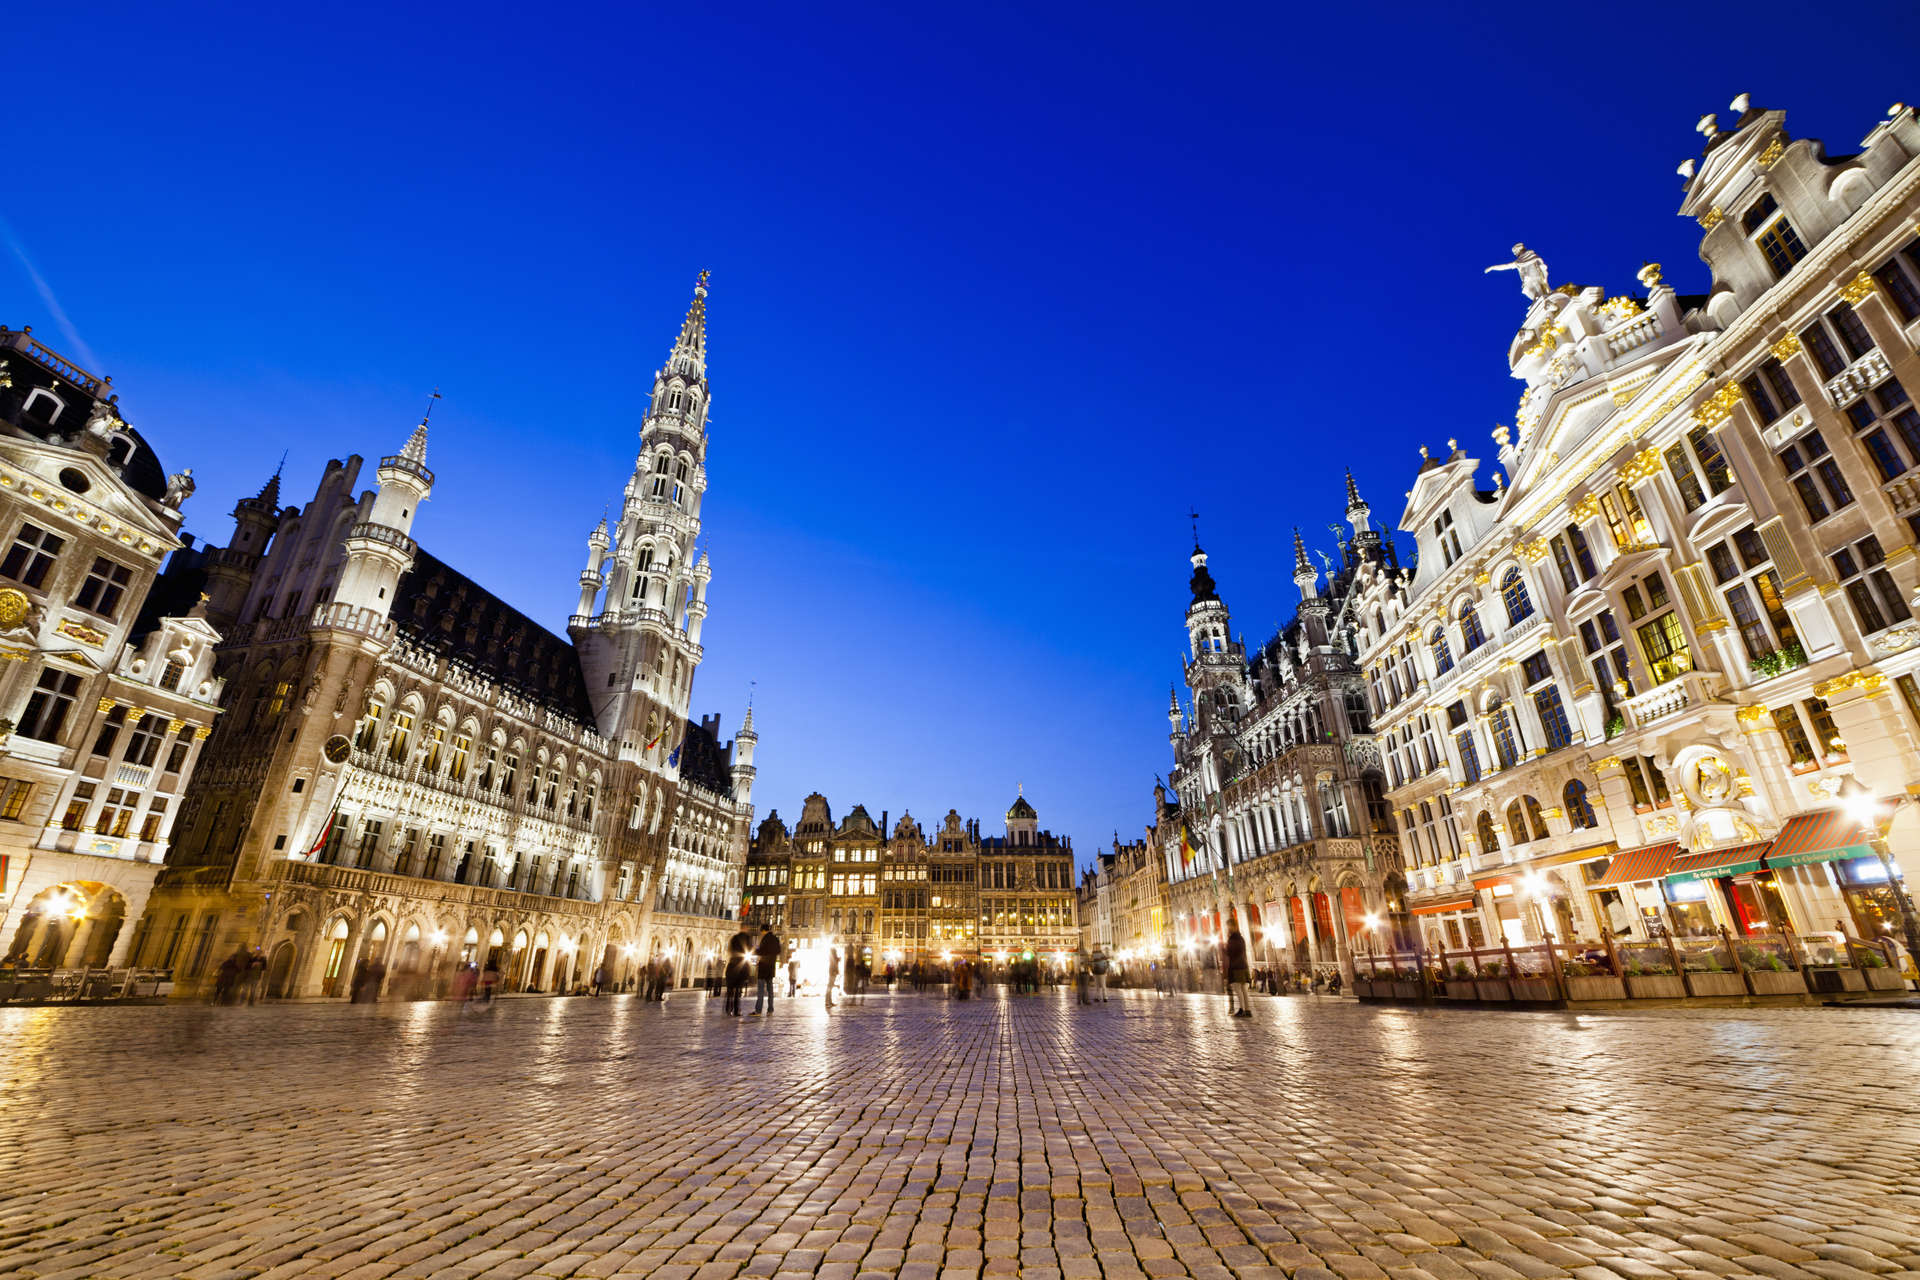 The Grand-Place, Brussels